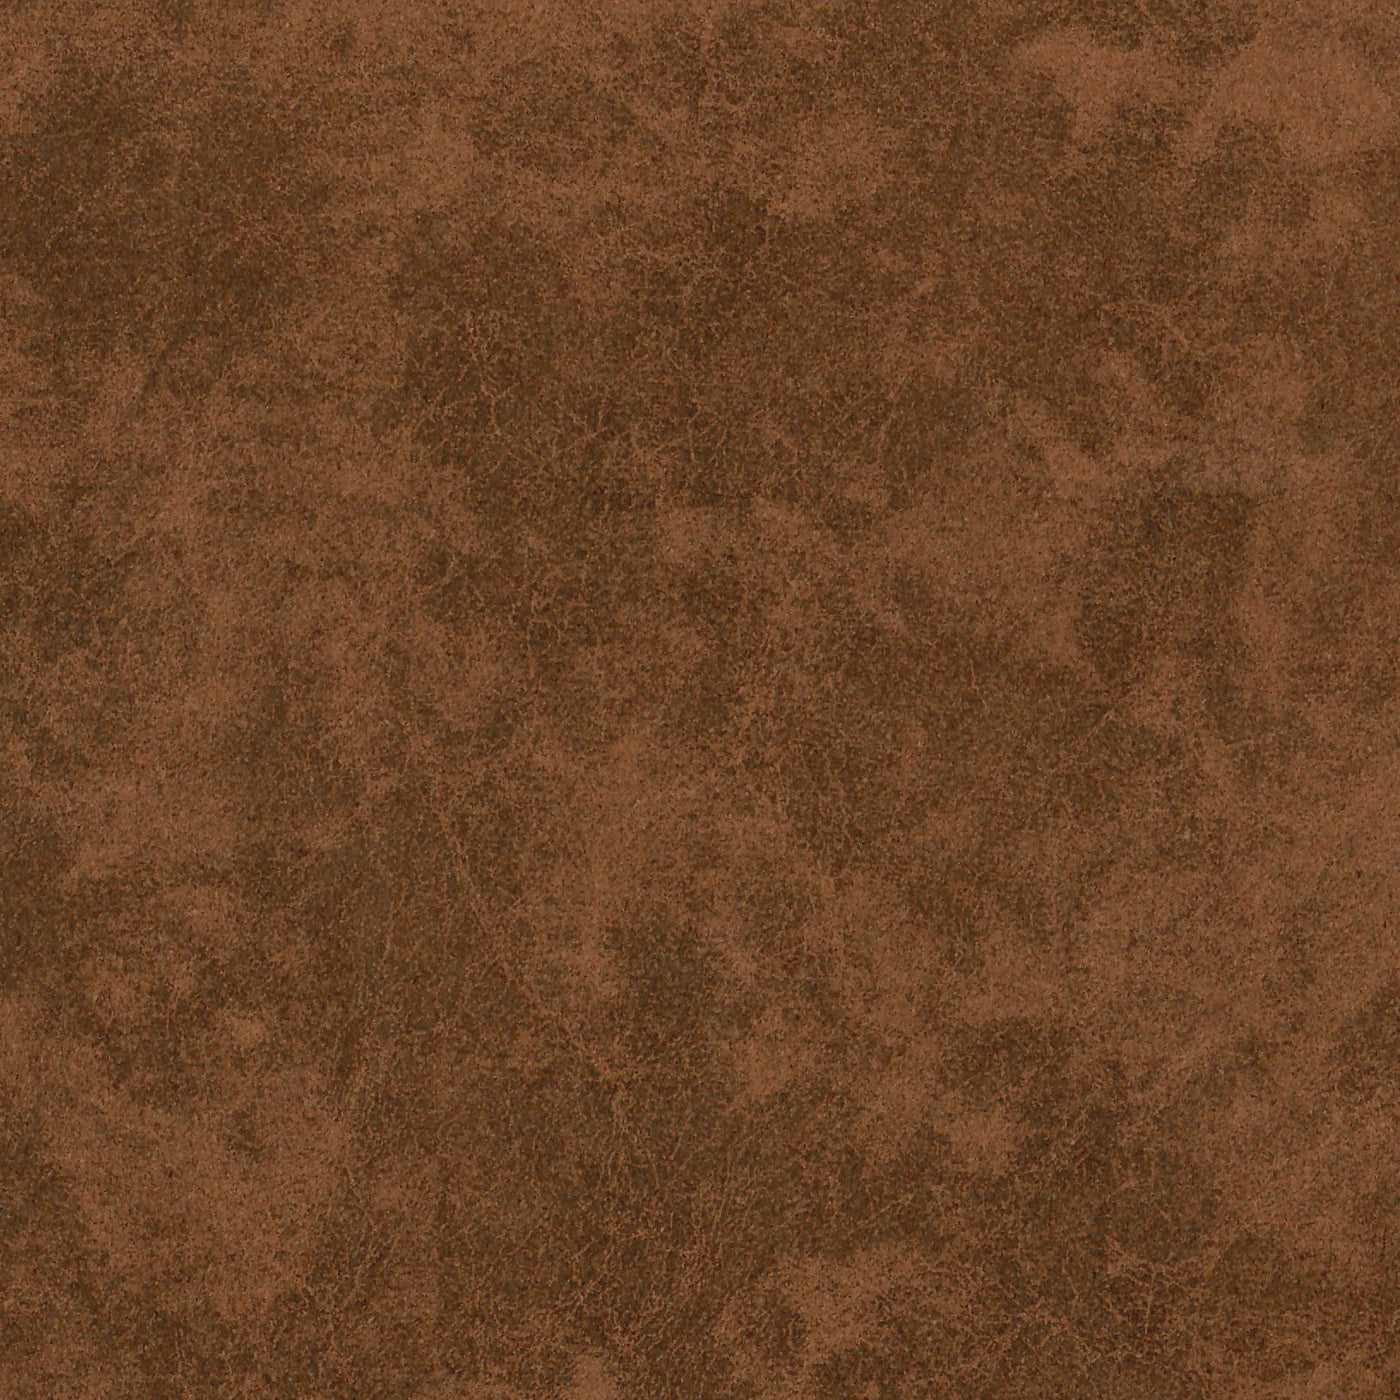 Lite Faux Leather Cork Fabric